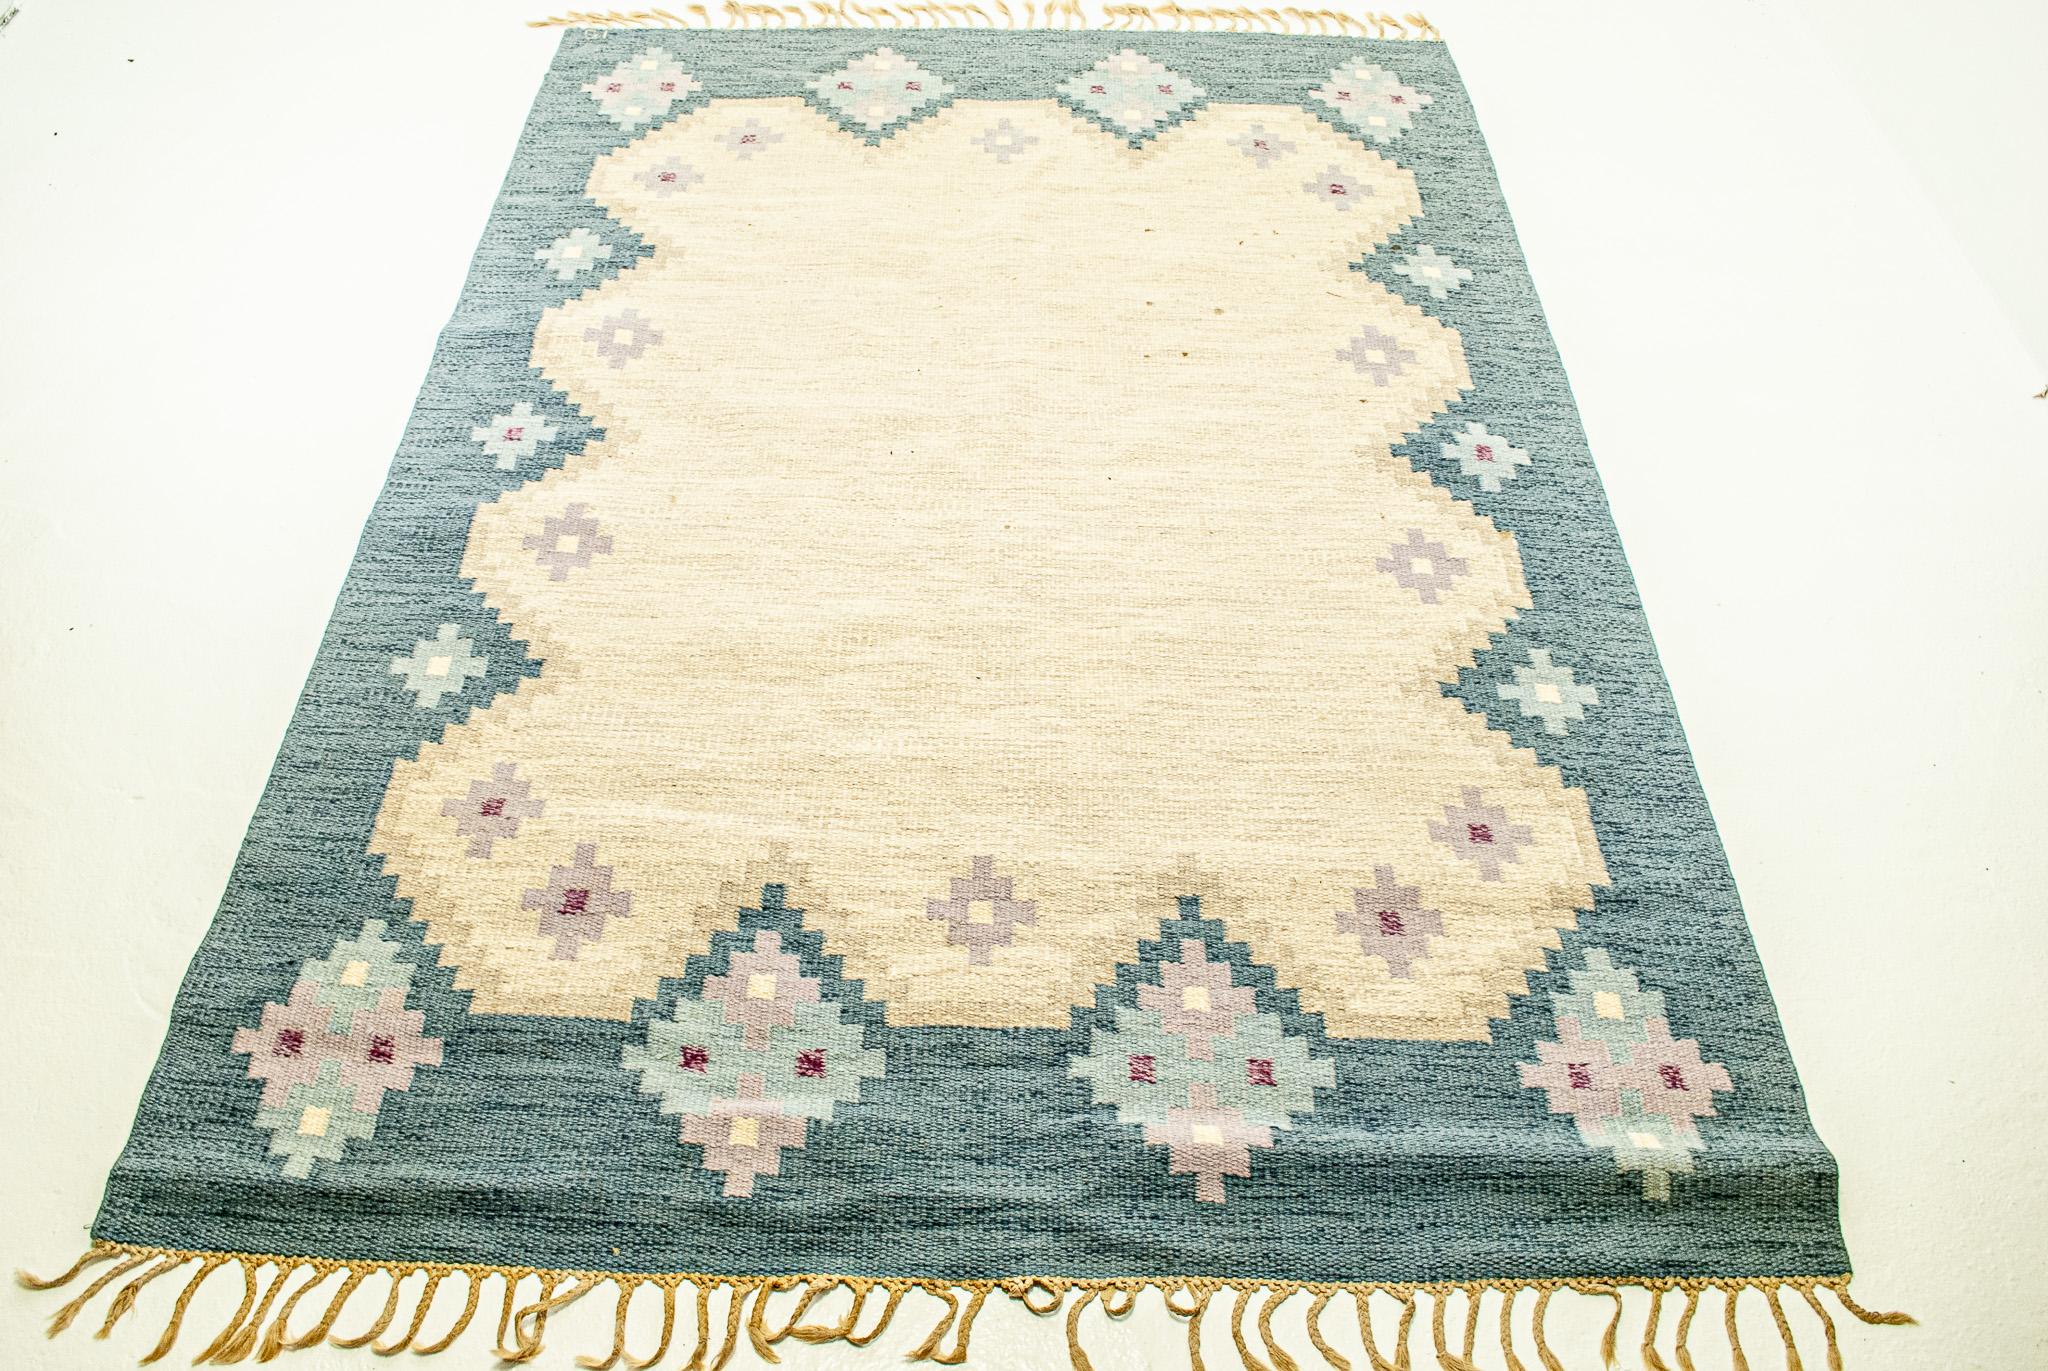 Ingegerd Silow is considered to be one of the most influential figures in Swedish carpet making and for a good reason. Not only was she a talented weaver, but also a great lover of local art. Her legacy lives on in exquisite Scandinavian style rugs